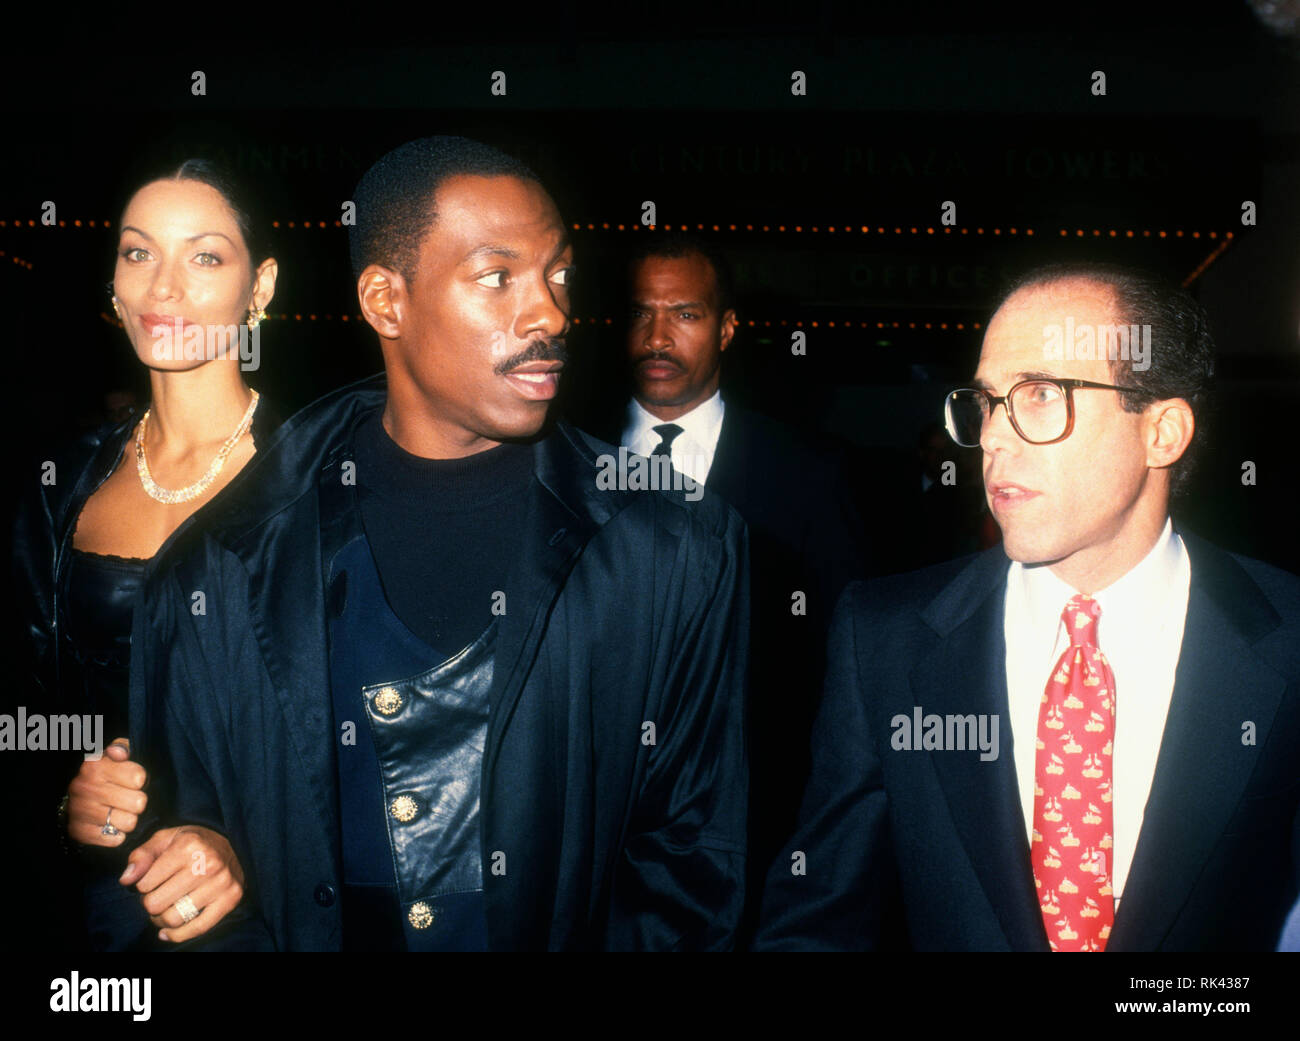 CENTURY CITY, CA - DECEMBER 14: Actor Eddie Murphy and model wife Nicole Mitchell Murphy and producer Jeffrey Katzenberg attend TriStar Pictures' 'Philadelphia' Premiere on December 14, 1993 at Cineplex Odeon Century Plaza Cinemas in Century City, California. Photo by Barry King/Alamy Stock Photo Stock Photo